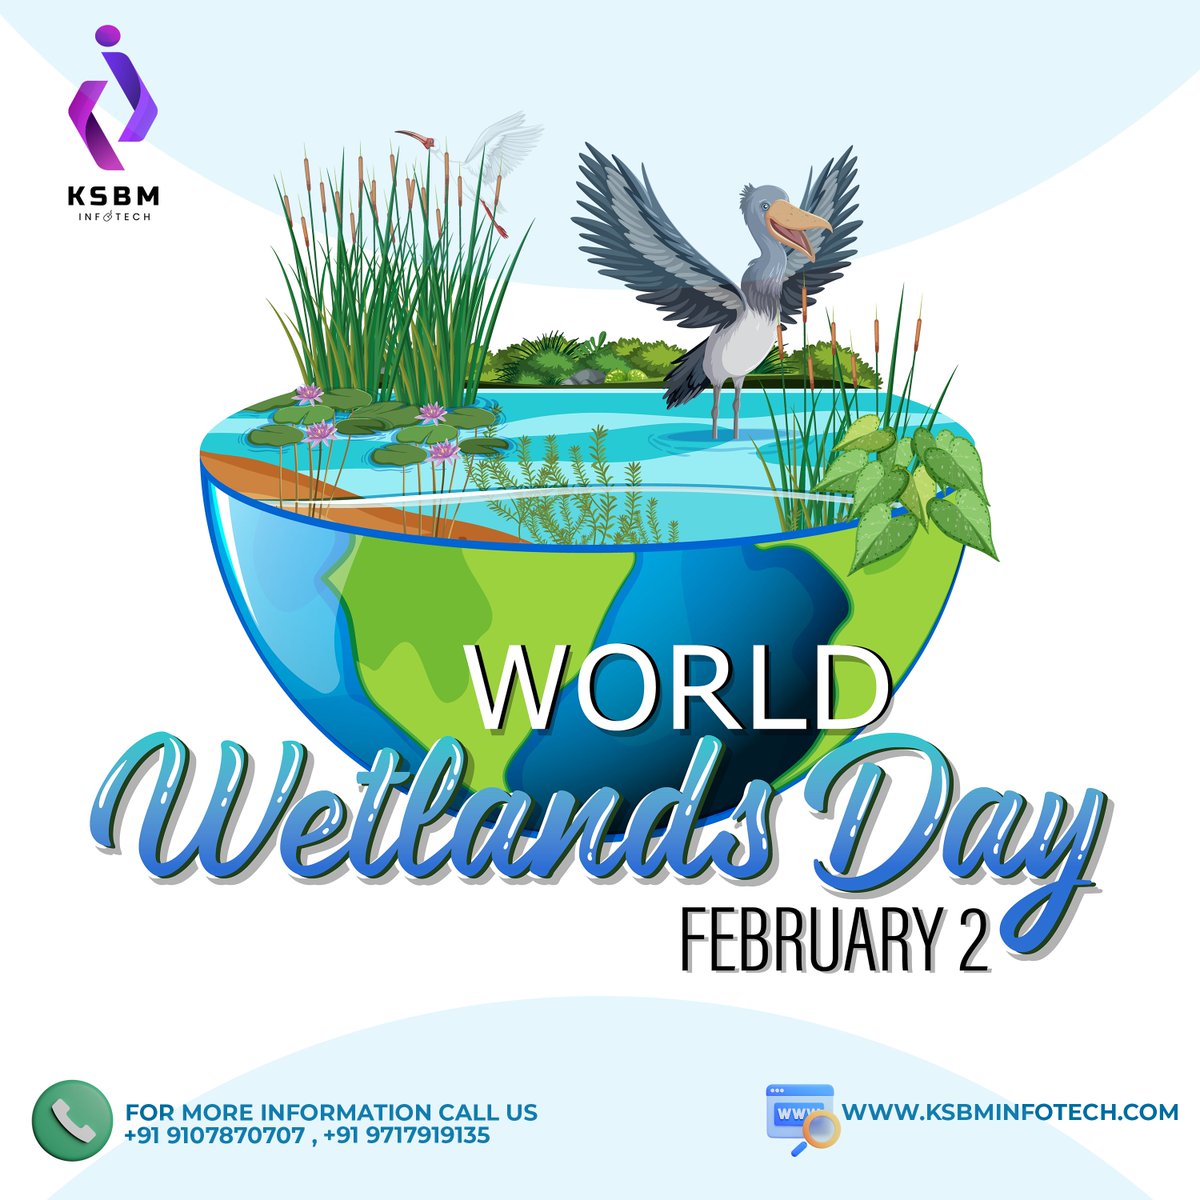 Embracing the beauty and importance of wetlands on this World Wetlands Day. 🌿💧 Let's unite to protect and preserve these vital ecosystems for a sustainable future. 

#WorldWetlandsDay #NatureConservation #WetlandsMatter #KsbmInfotech #AstrologyAppDevelopment